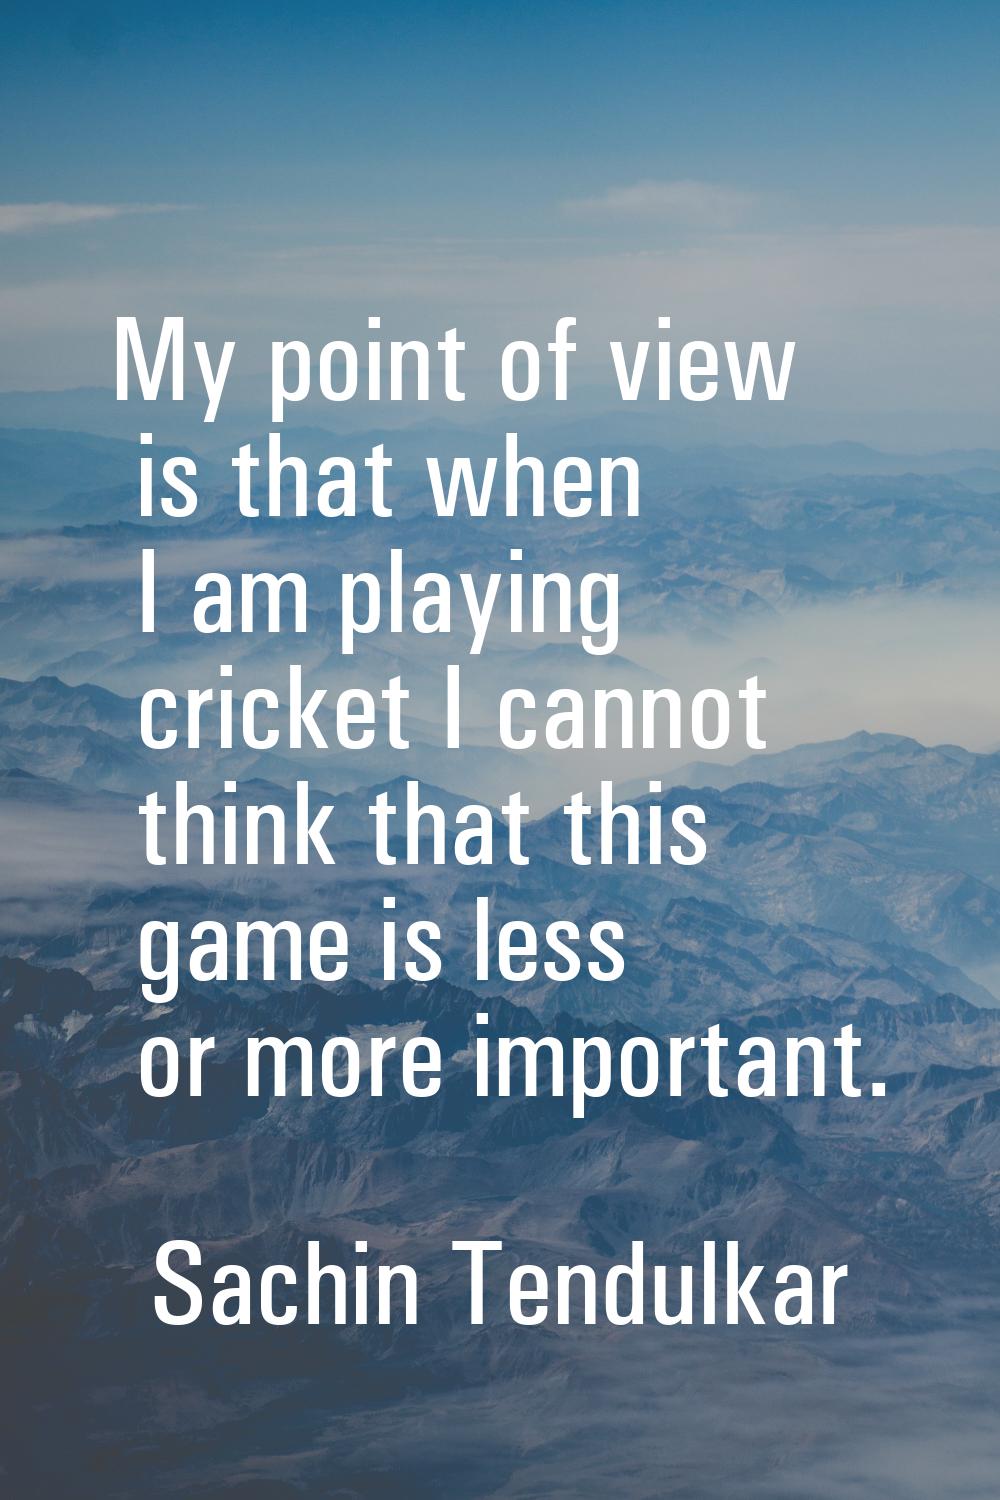 My point of view is that when I am playing cricket I cannot think that this game is less or more im